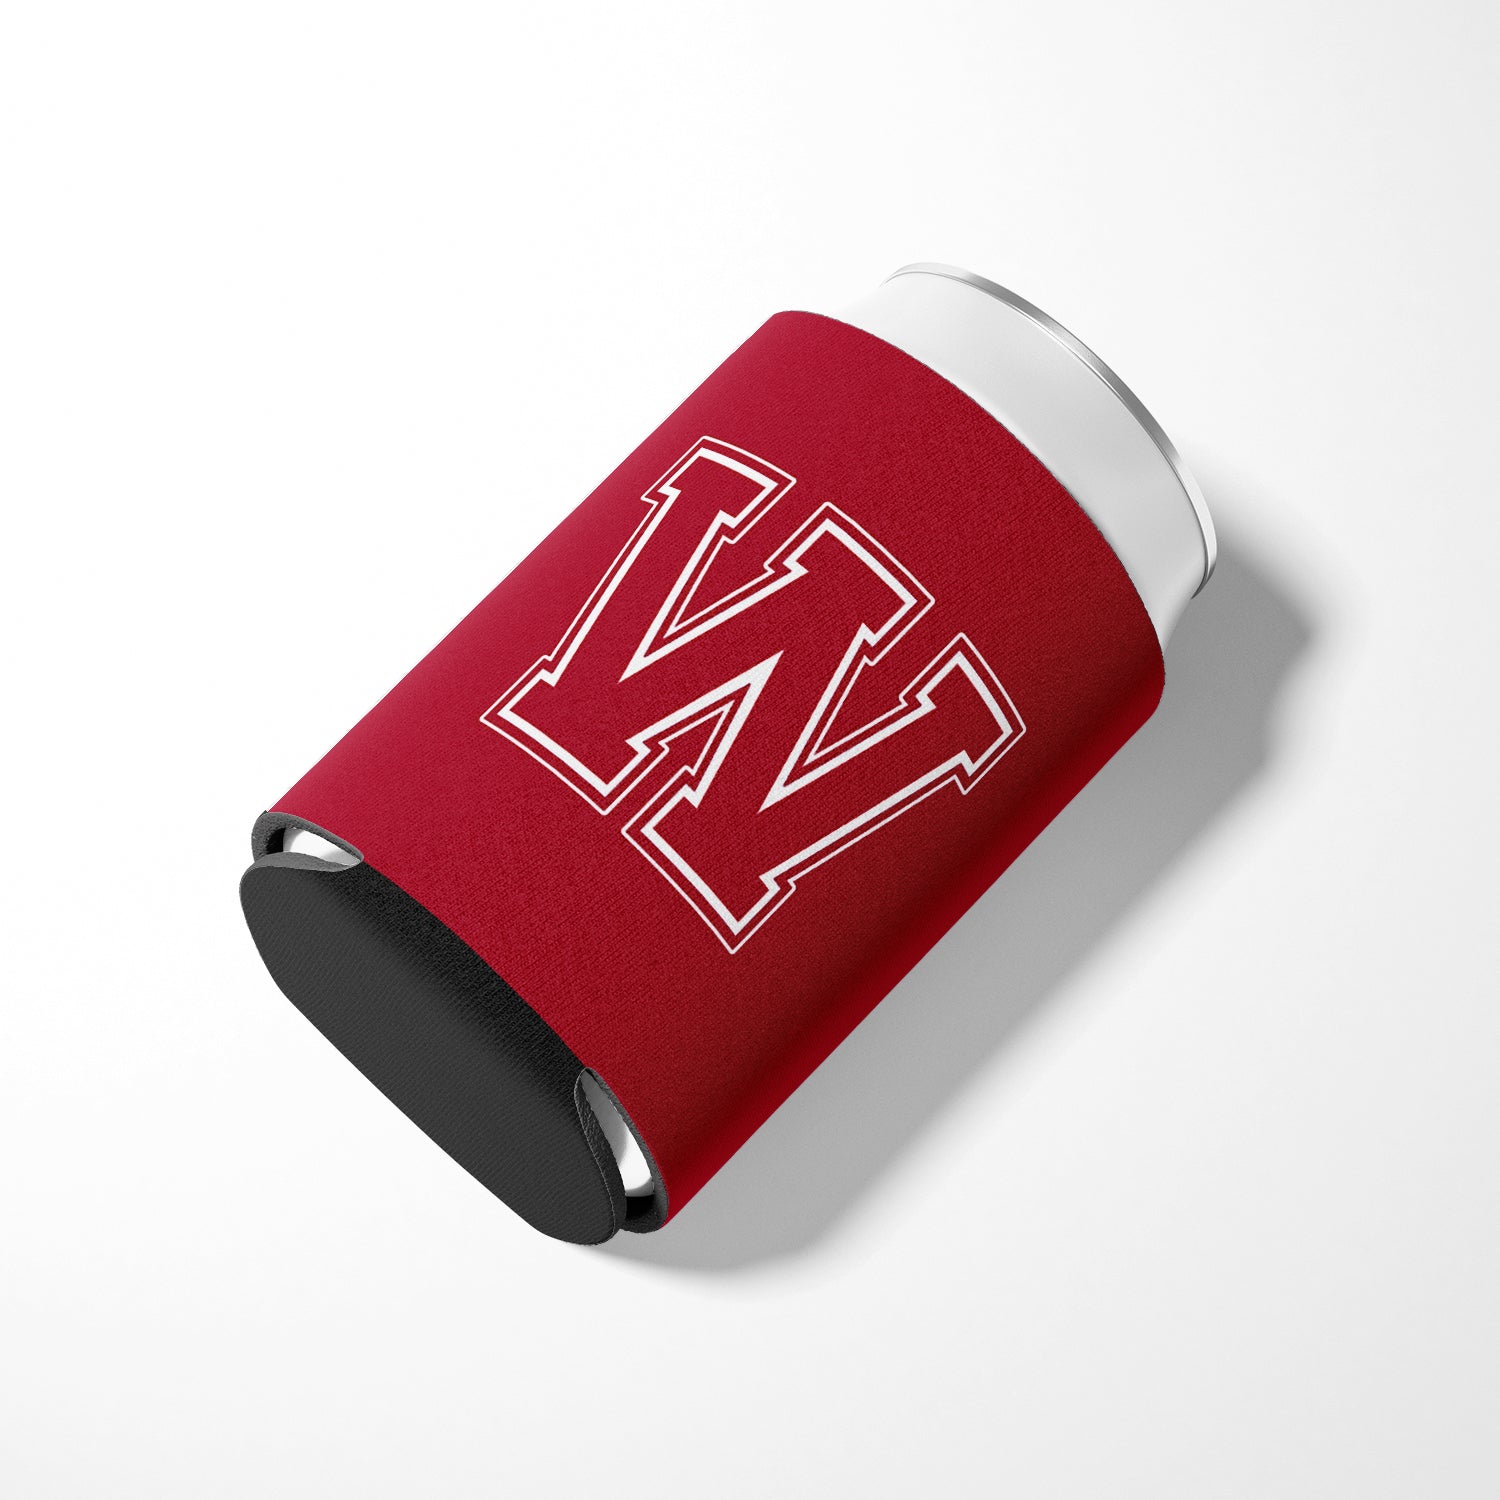 Letter W Initial Monogram - Maroon and White Can or Bottle Beverage Insulator Hugger.